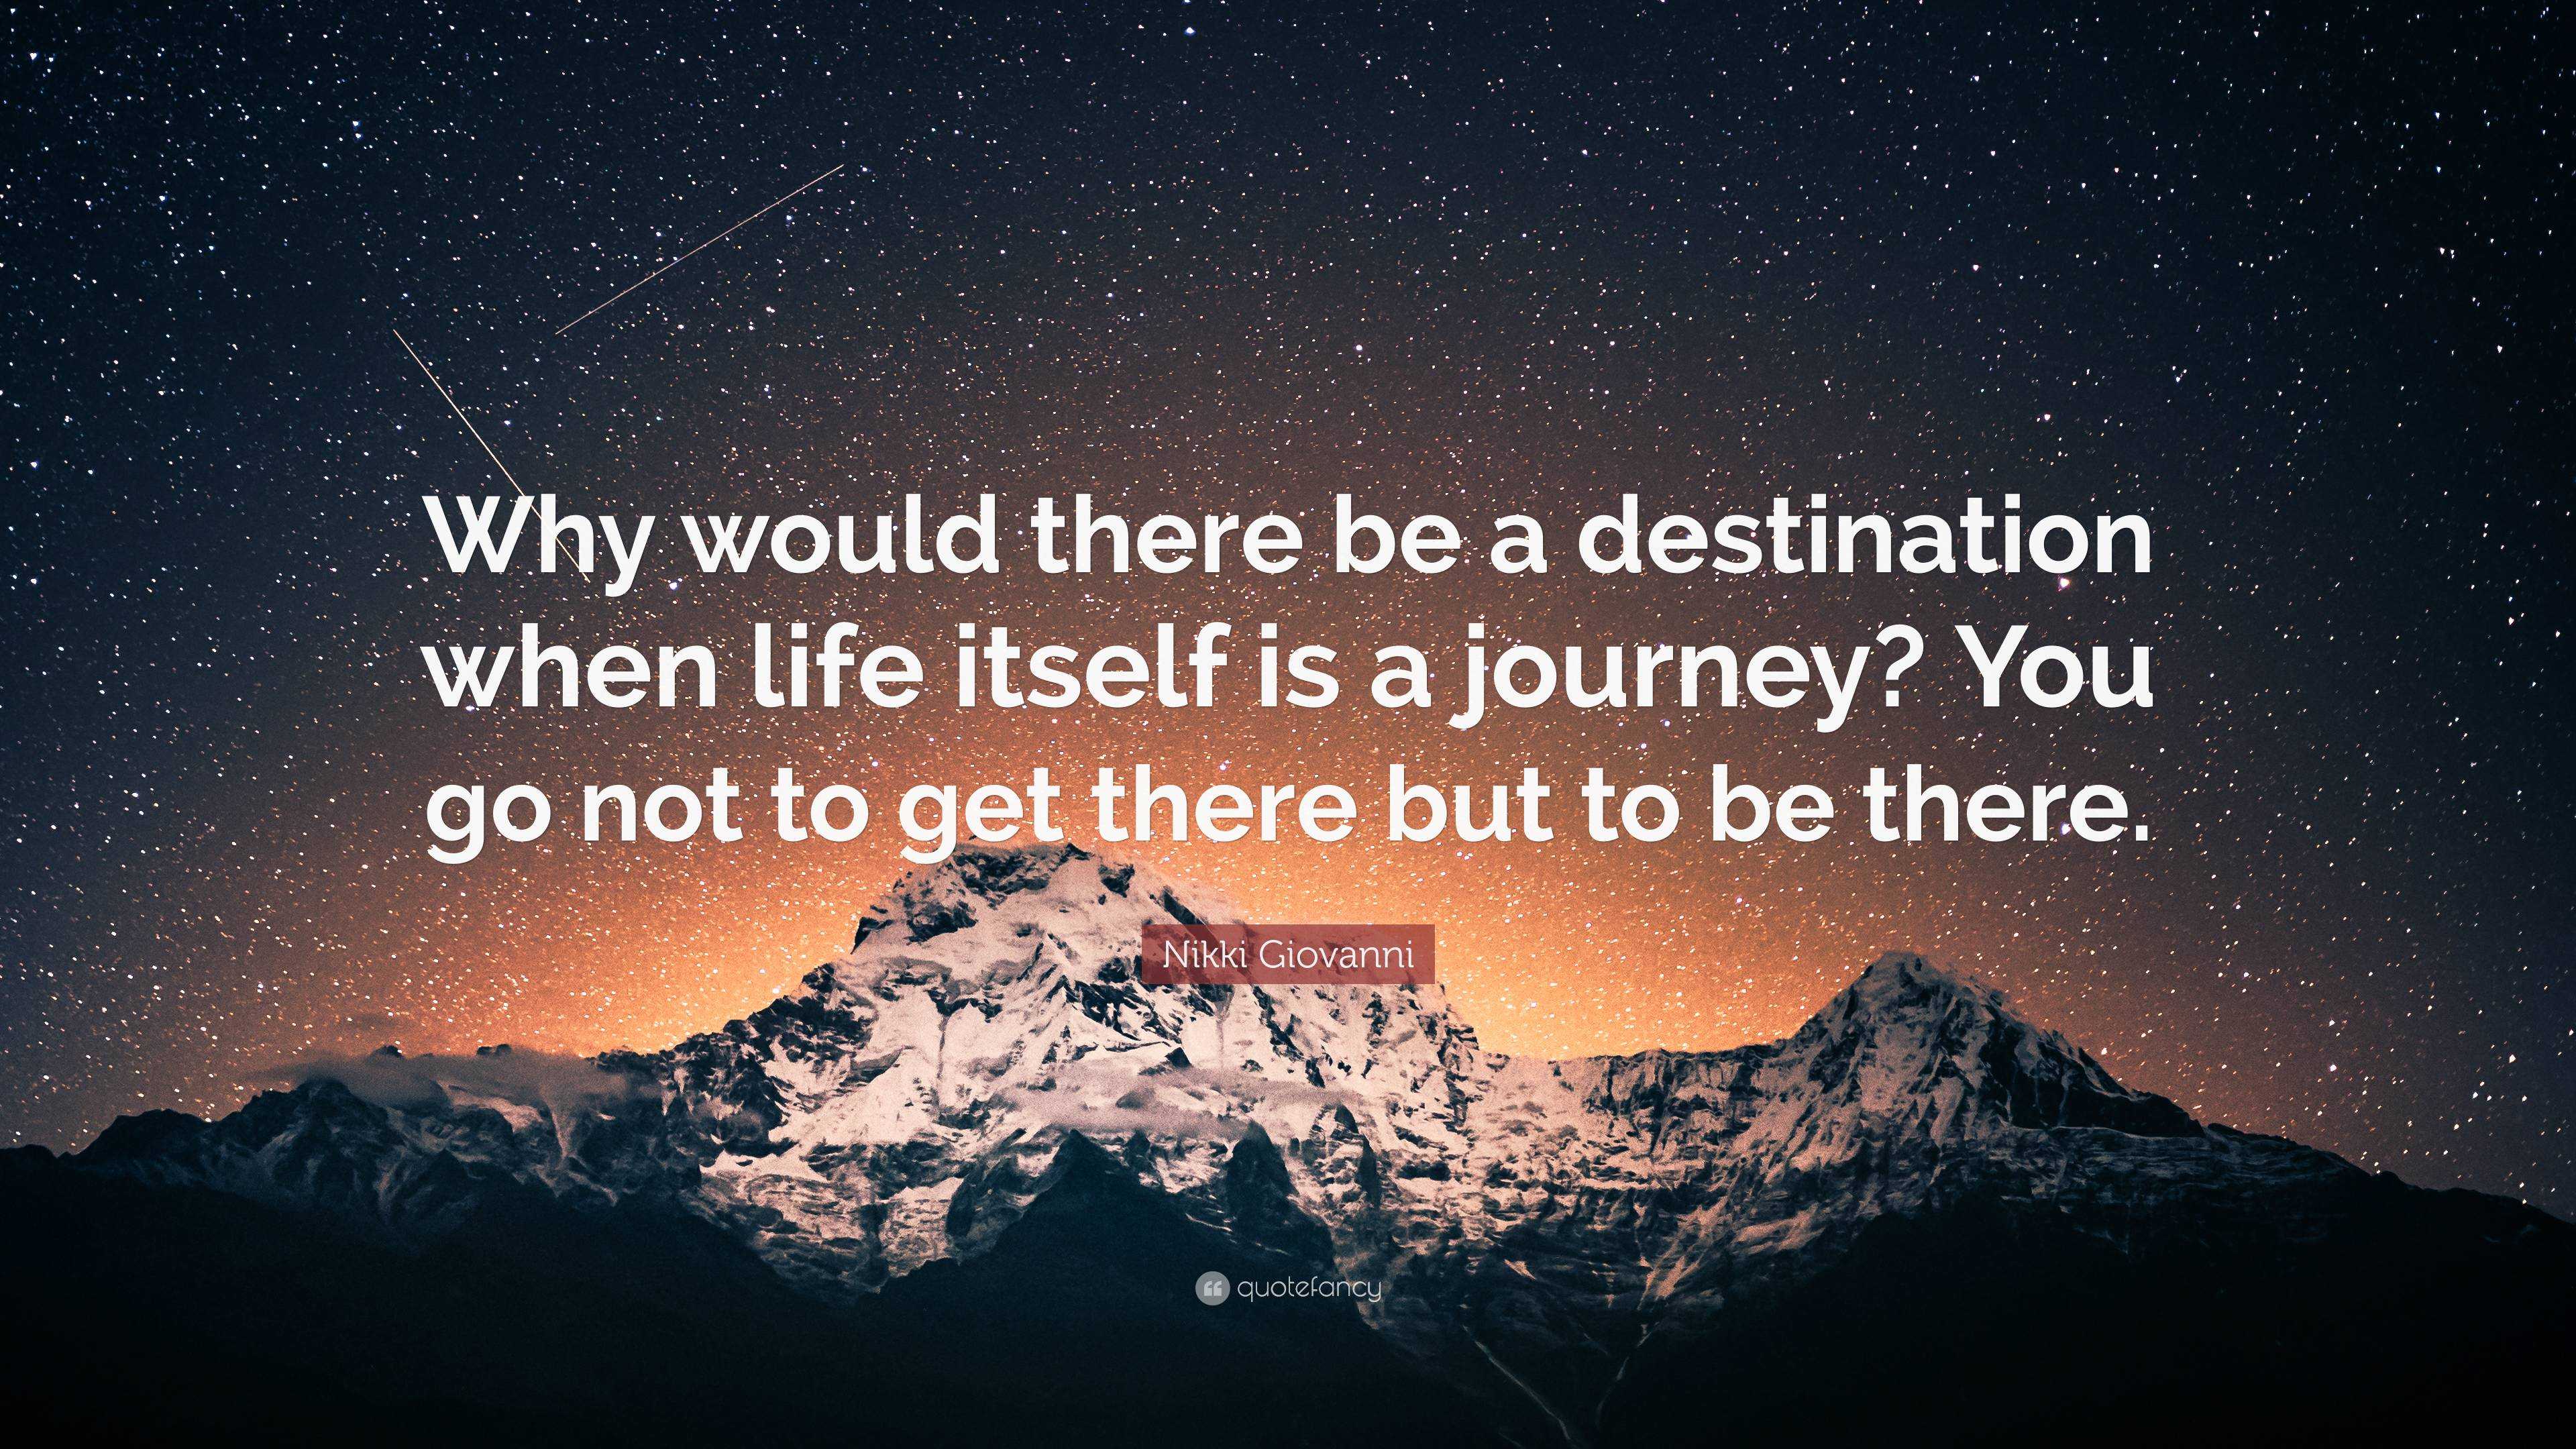 Nikki Giovanni Quote: “Why would there be a destination when life ...